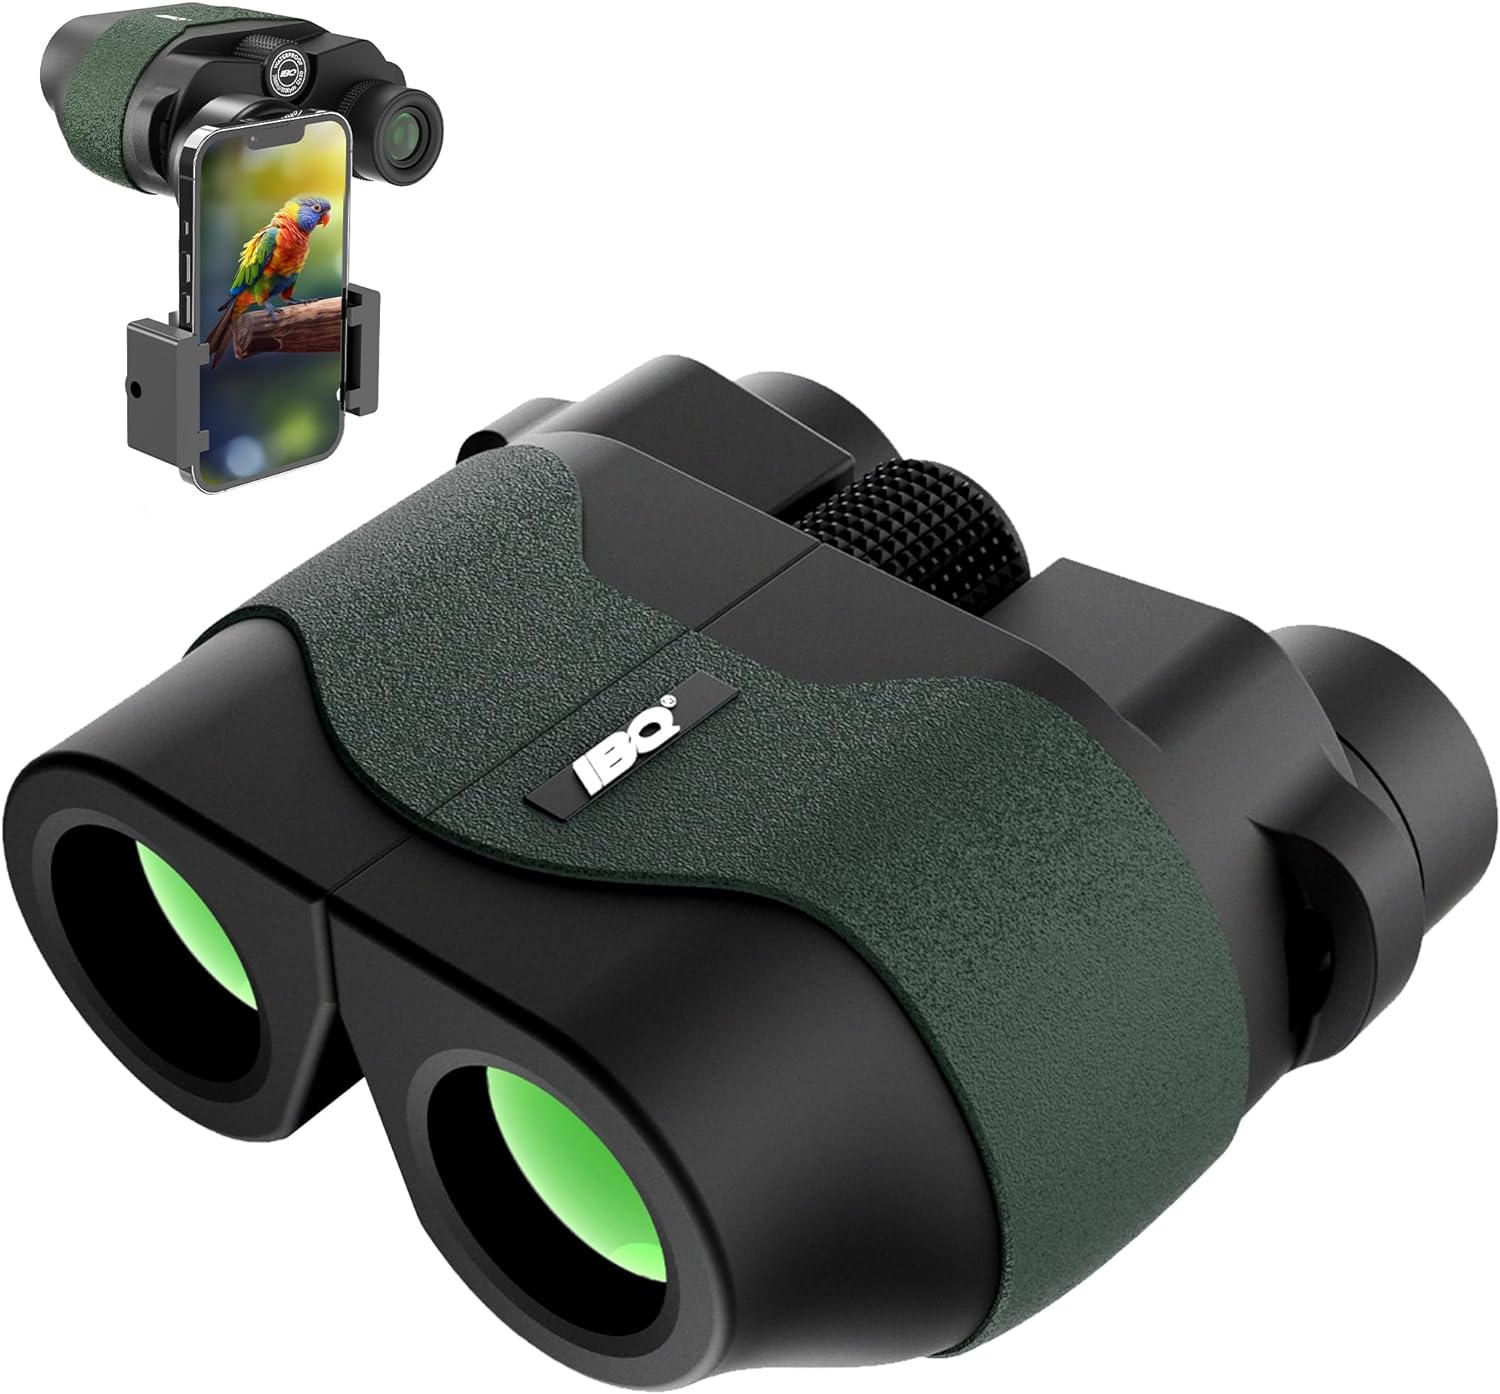 IBQ Binoculars for Adults,12x30 Binoculars with Upgraded Phone Adapter, Compact Binocular for Bird Watching,Small Binoculars for Kids,with Daily Waterproof,Outdoor Sport,Hunting,Theater and Concerts